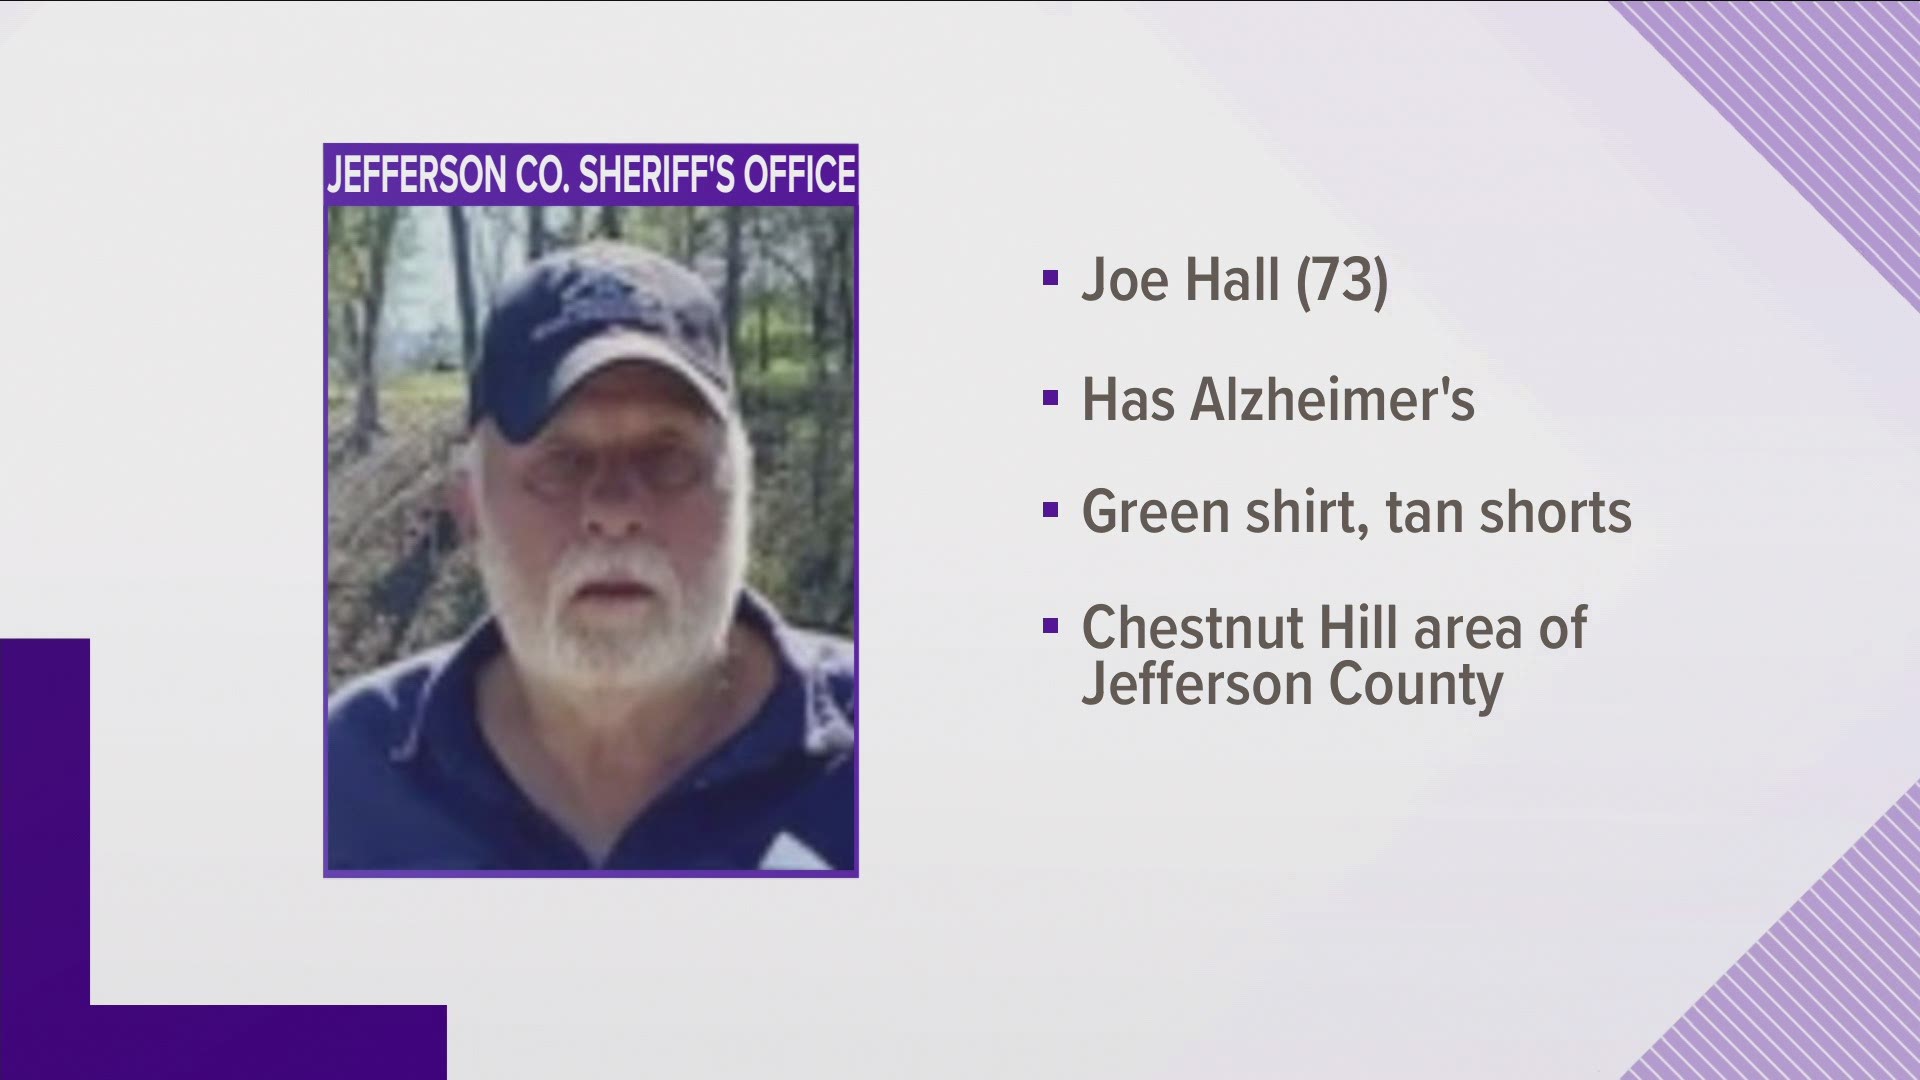 The TBI issued a Silver Alert for a missing man last seen in Jefferson County